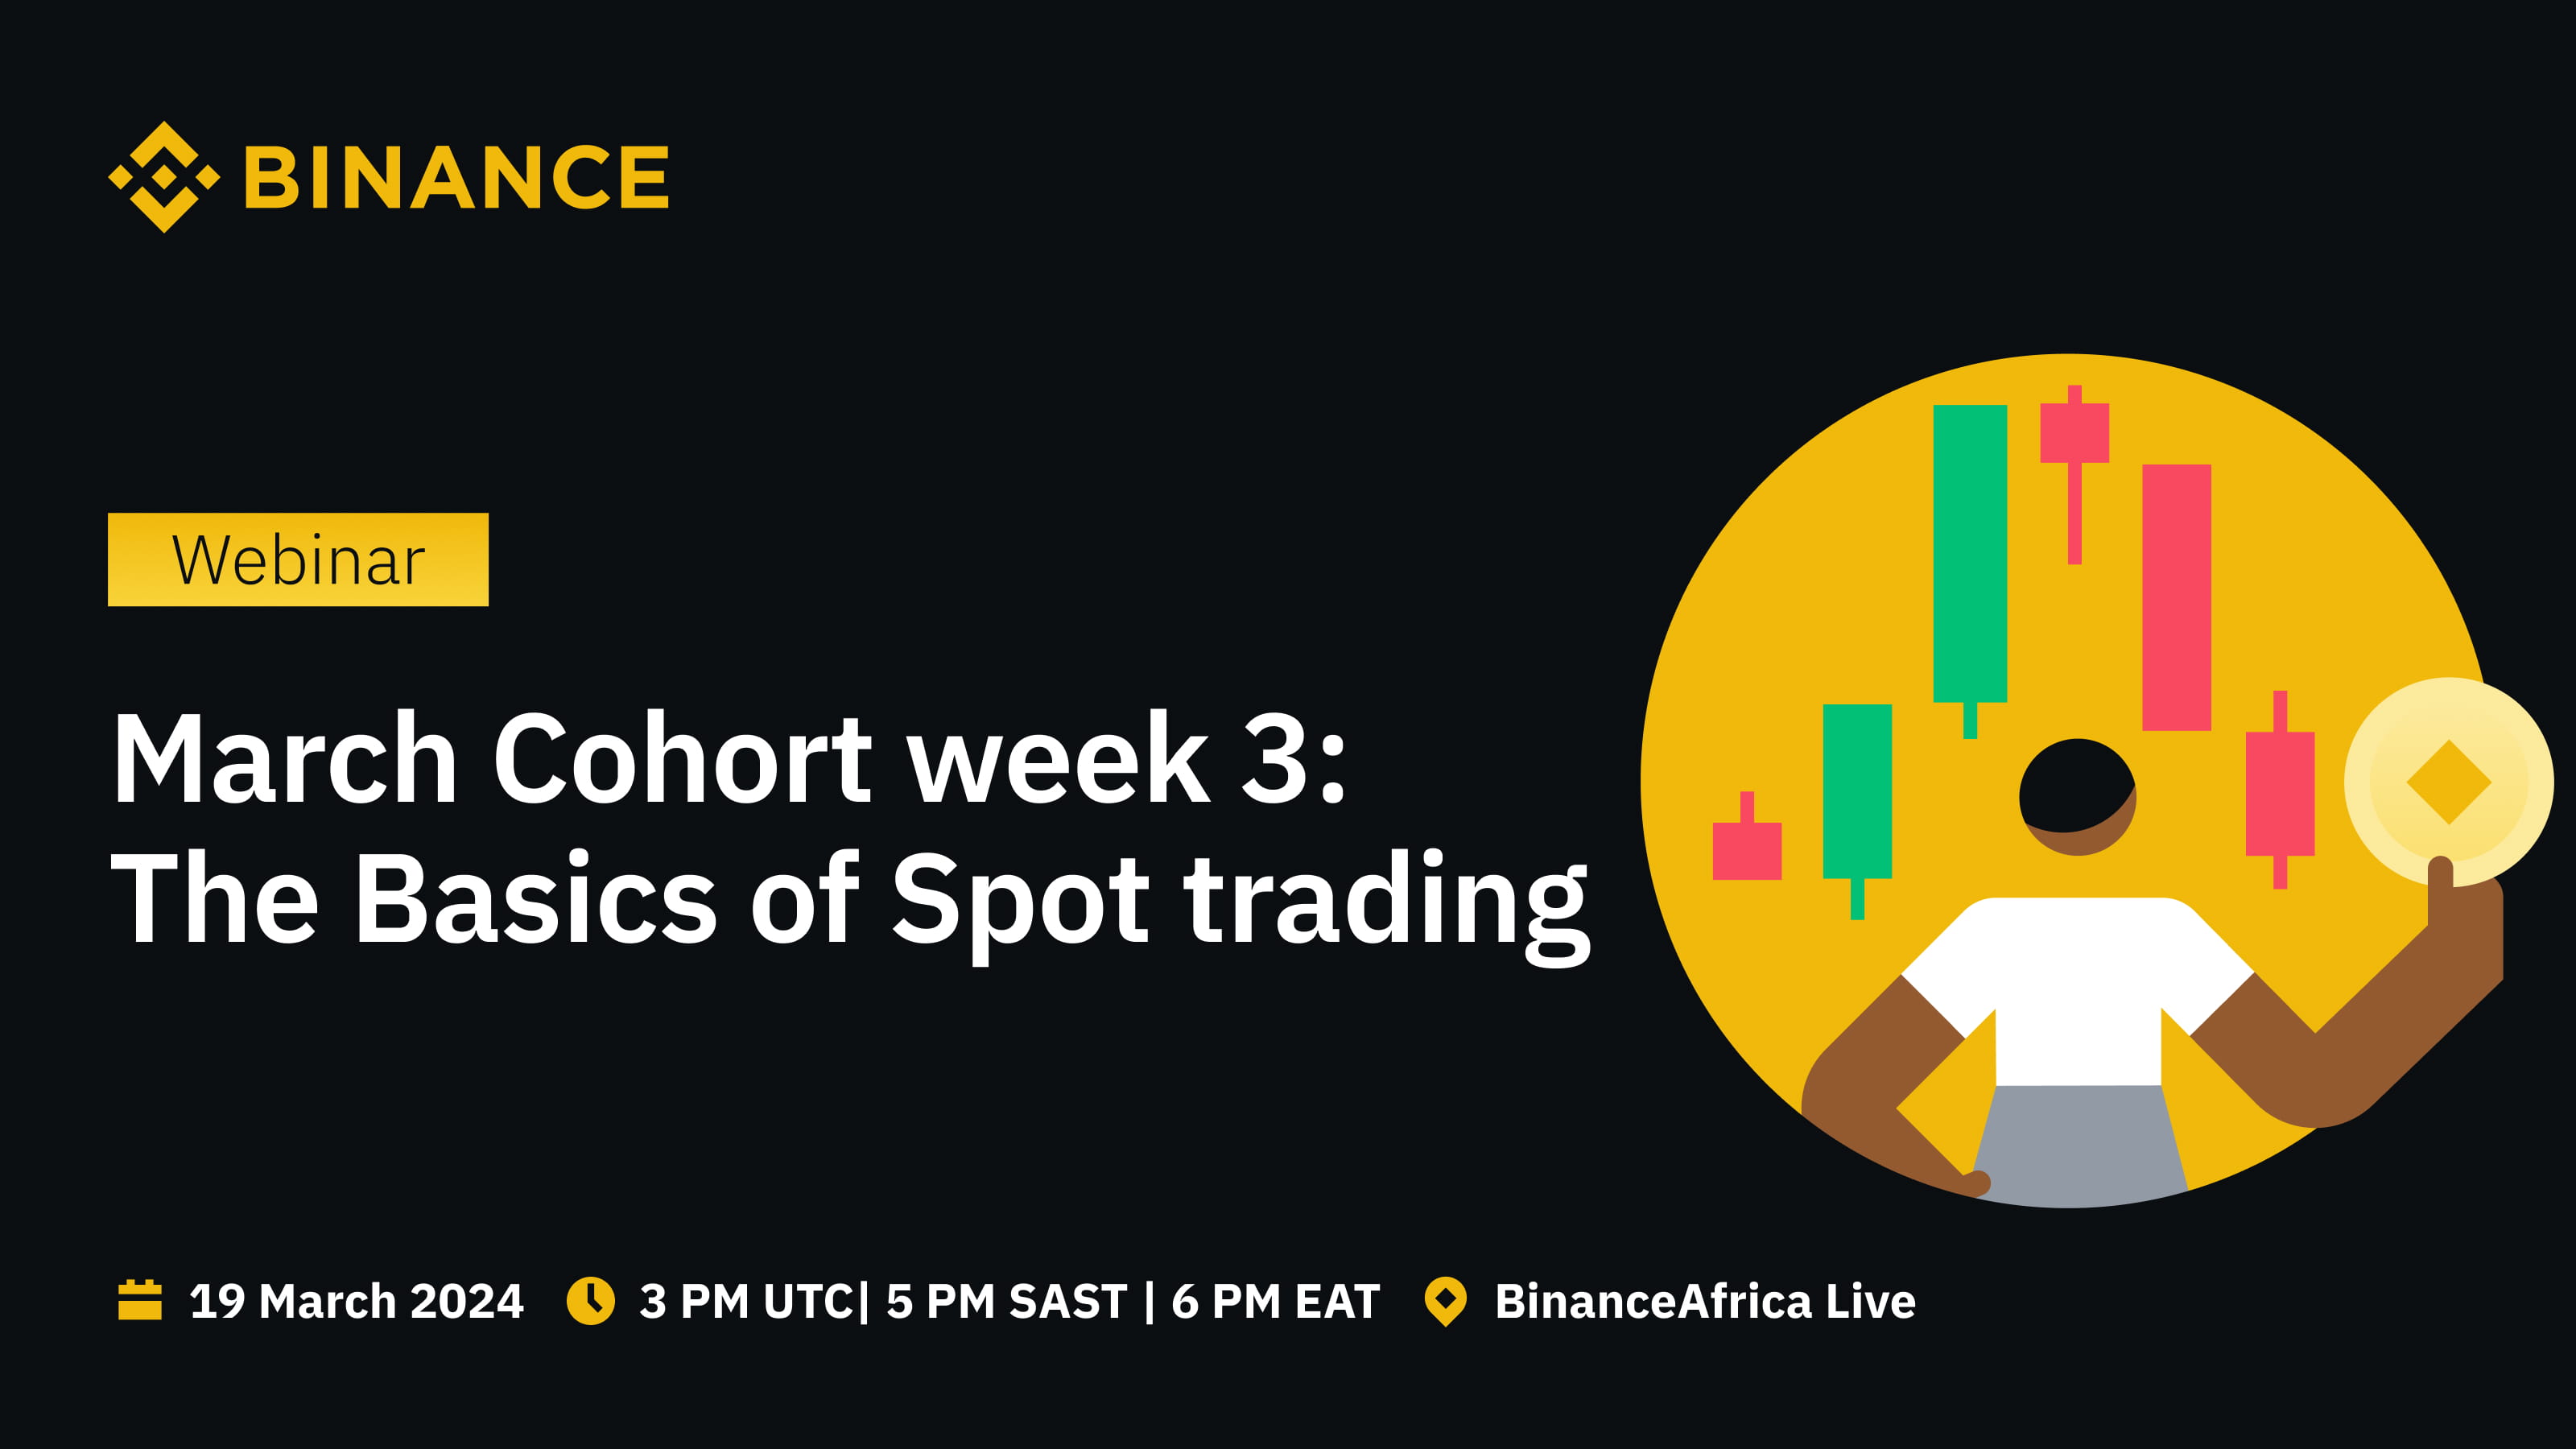 March Cohort week 3: The Basics of Spot trading